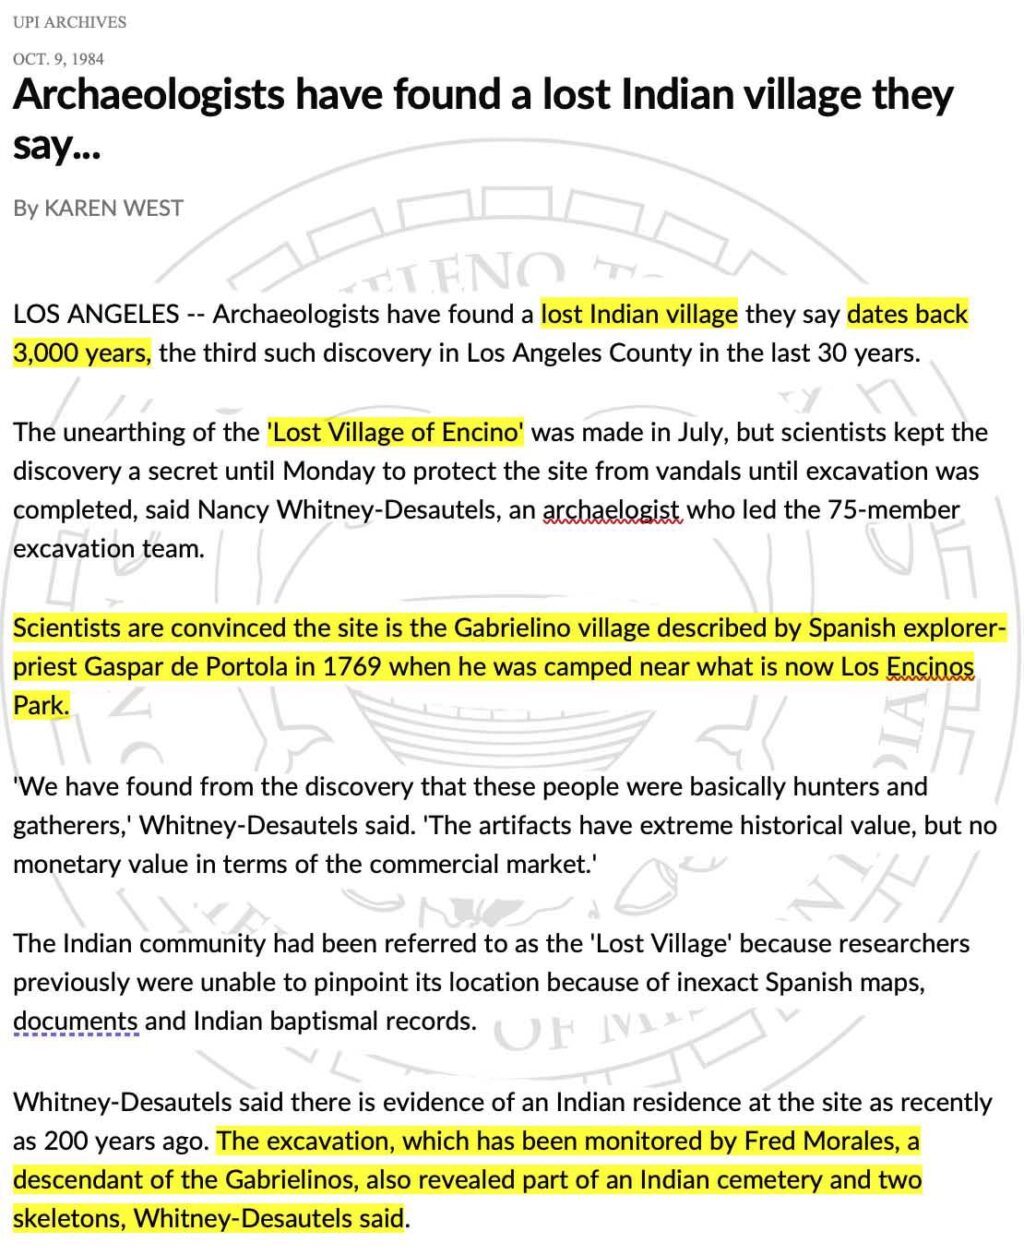 Text of article from UPI Archives dated October 9, 1984, titled "Archeologists have discovered a lost Indian village..." Text details how the excavation, monitored by Gabrielino descendant Fred Morales, uncovered a 3,000 year old site in Encino.